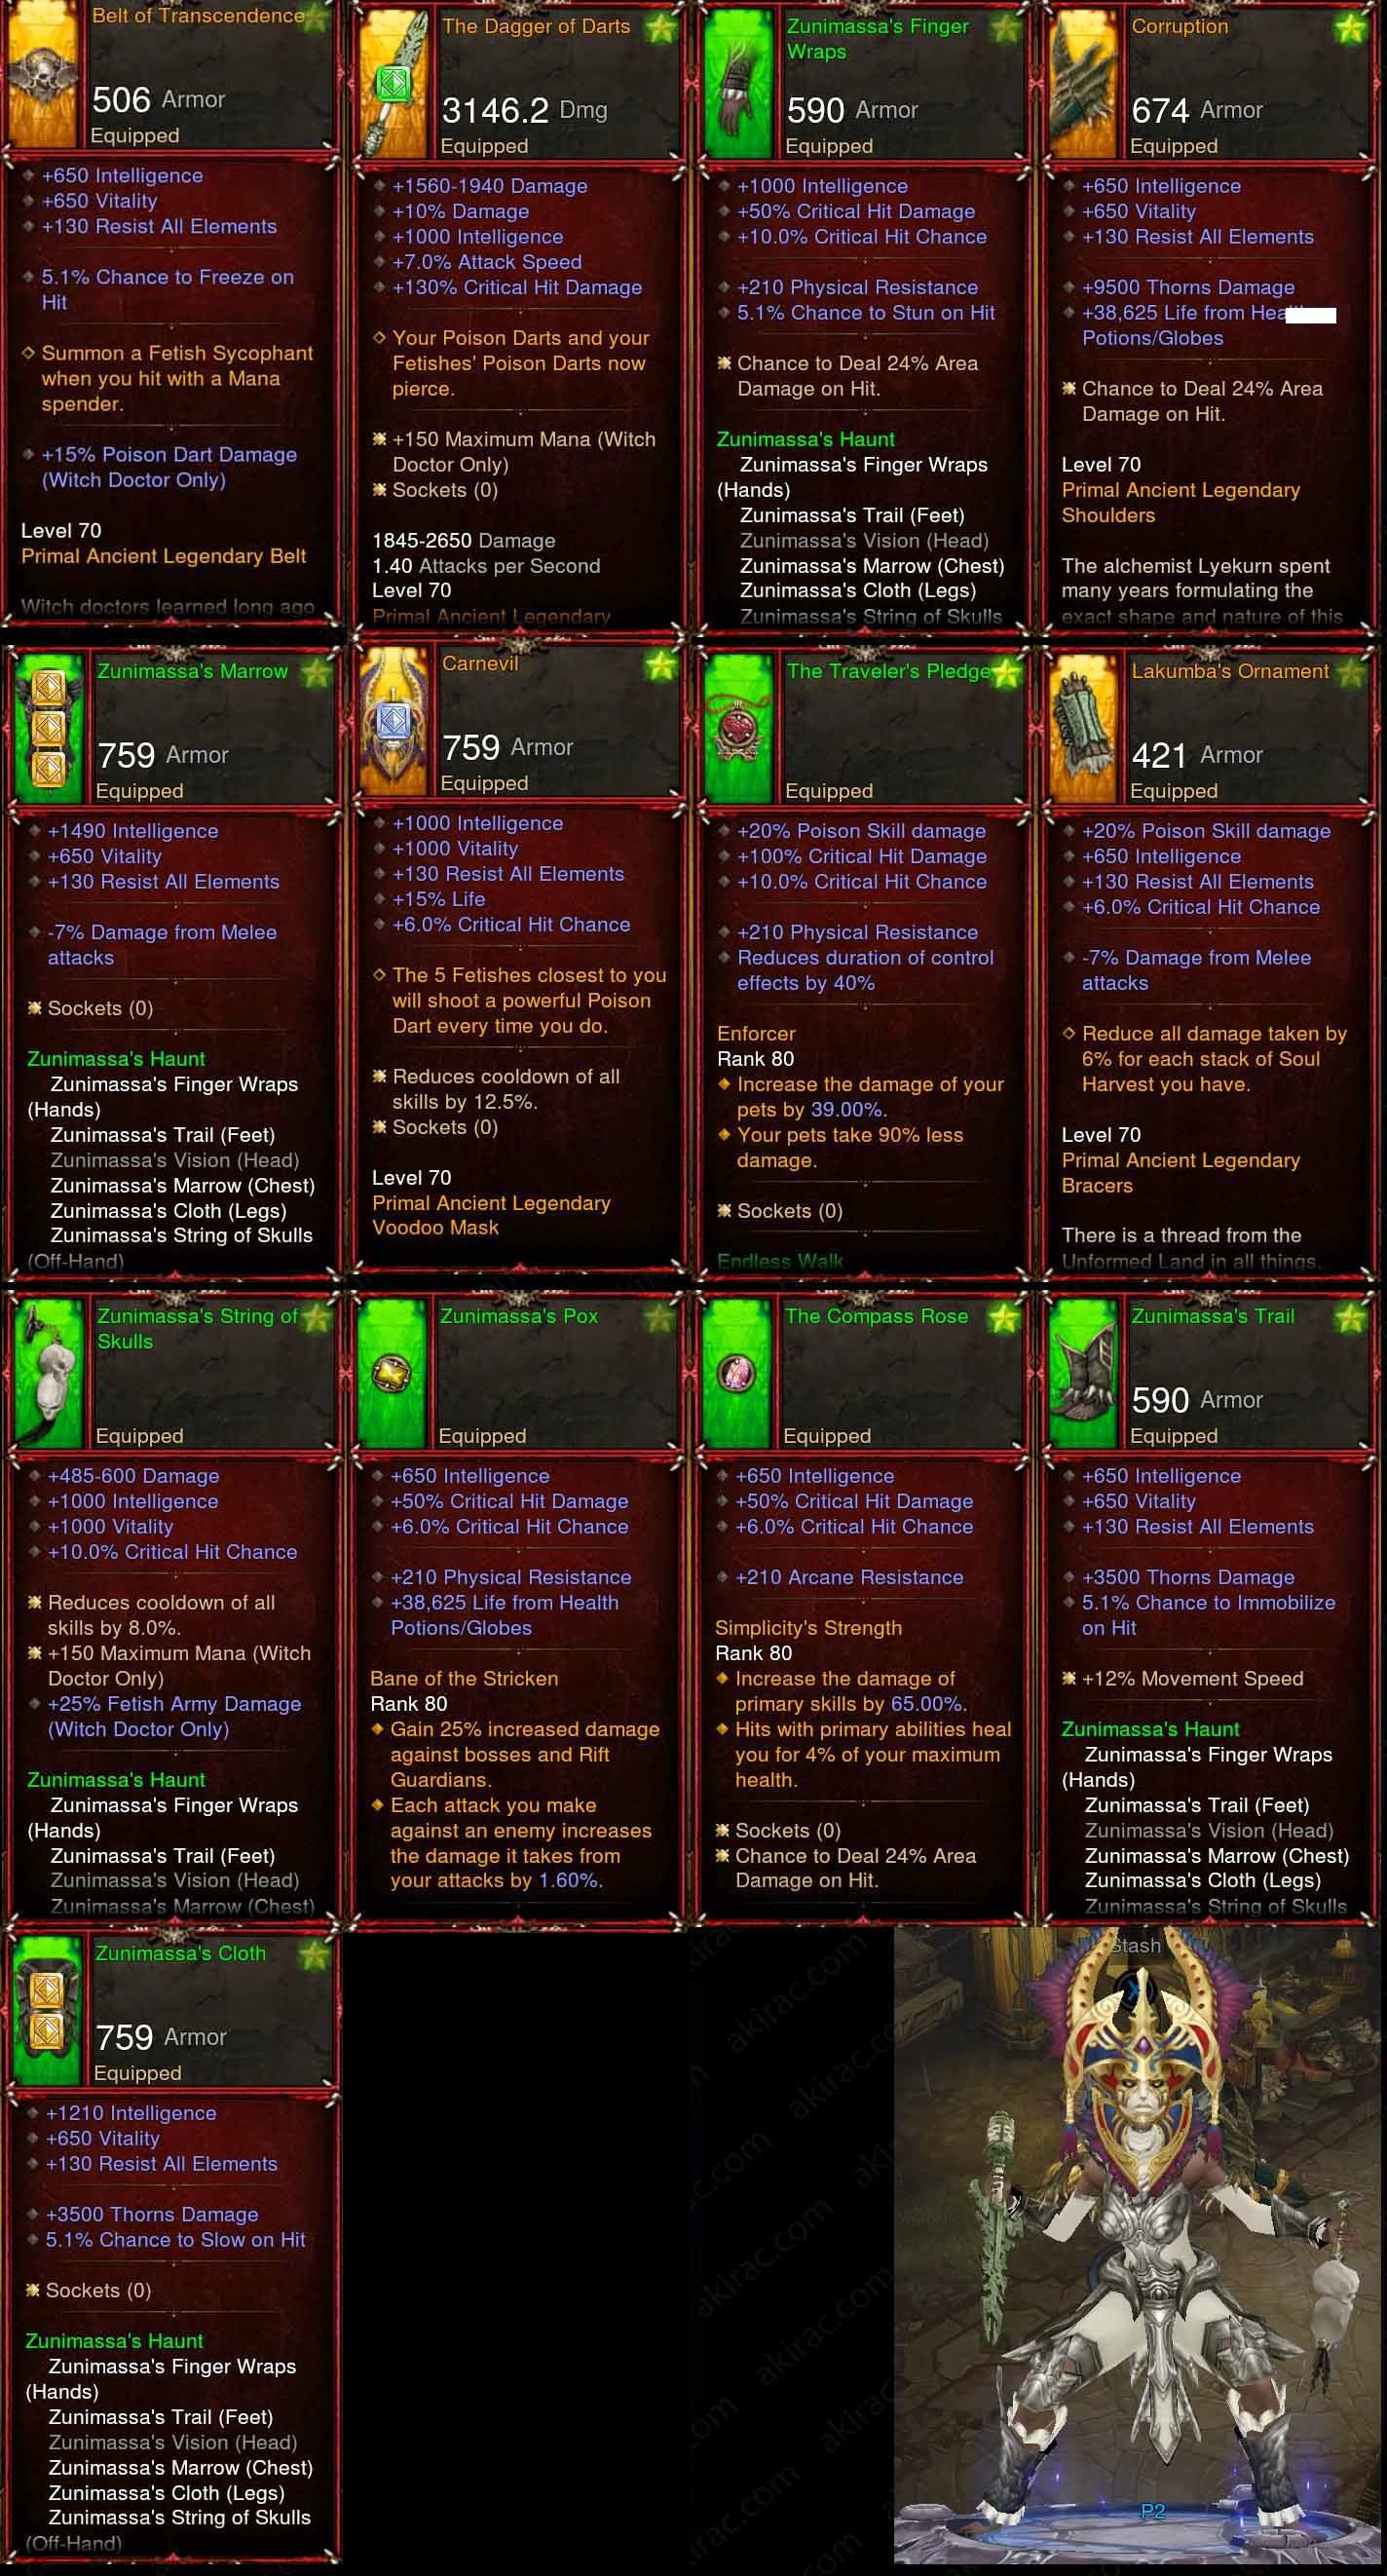 [Primal Ancient] + Damage BOOSTED Fake Legit Zunimassa Witch Doctor Diablo 3 Mods ROS Seasonal and Non Seasonal Save Mod - Modded Items and Gear - Hacks - Cheats - Trainers for Playstation 4 - Playstation 5 - Nintendo Switch - Xbox One